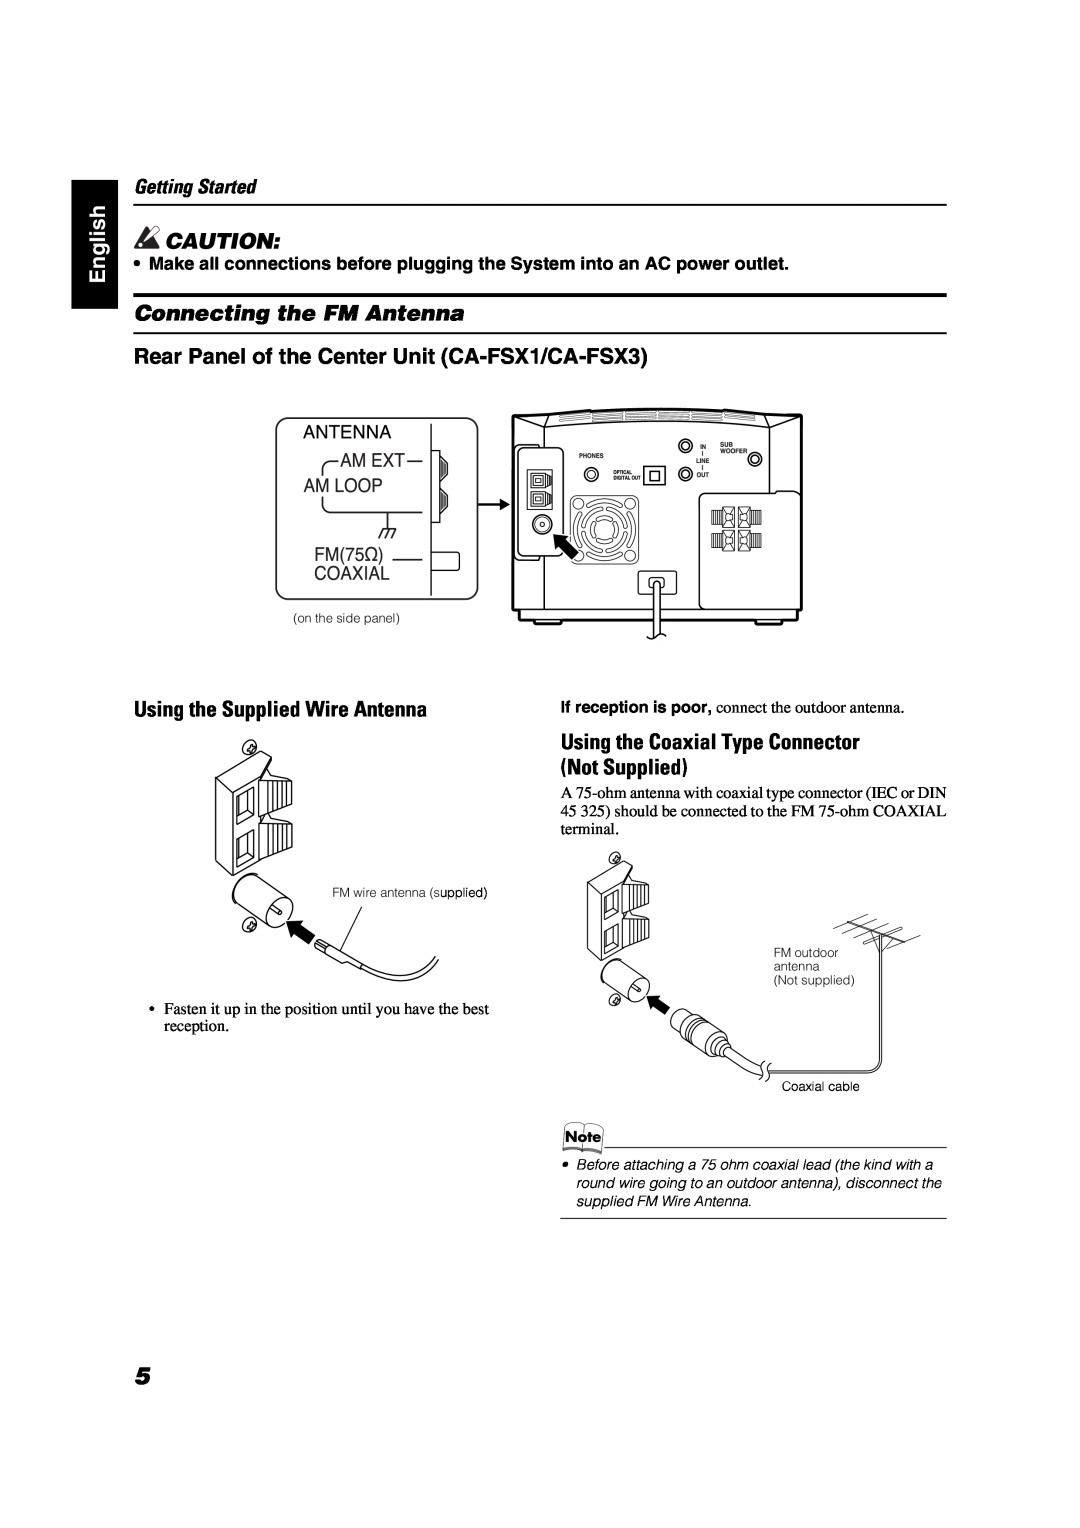 JVC FS-X1, FS-X3 manual English, Connecting the FM Antenna, Using the Supplied Wire Antenna, Getting Started 